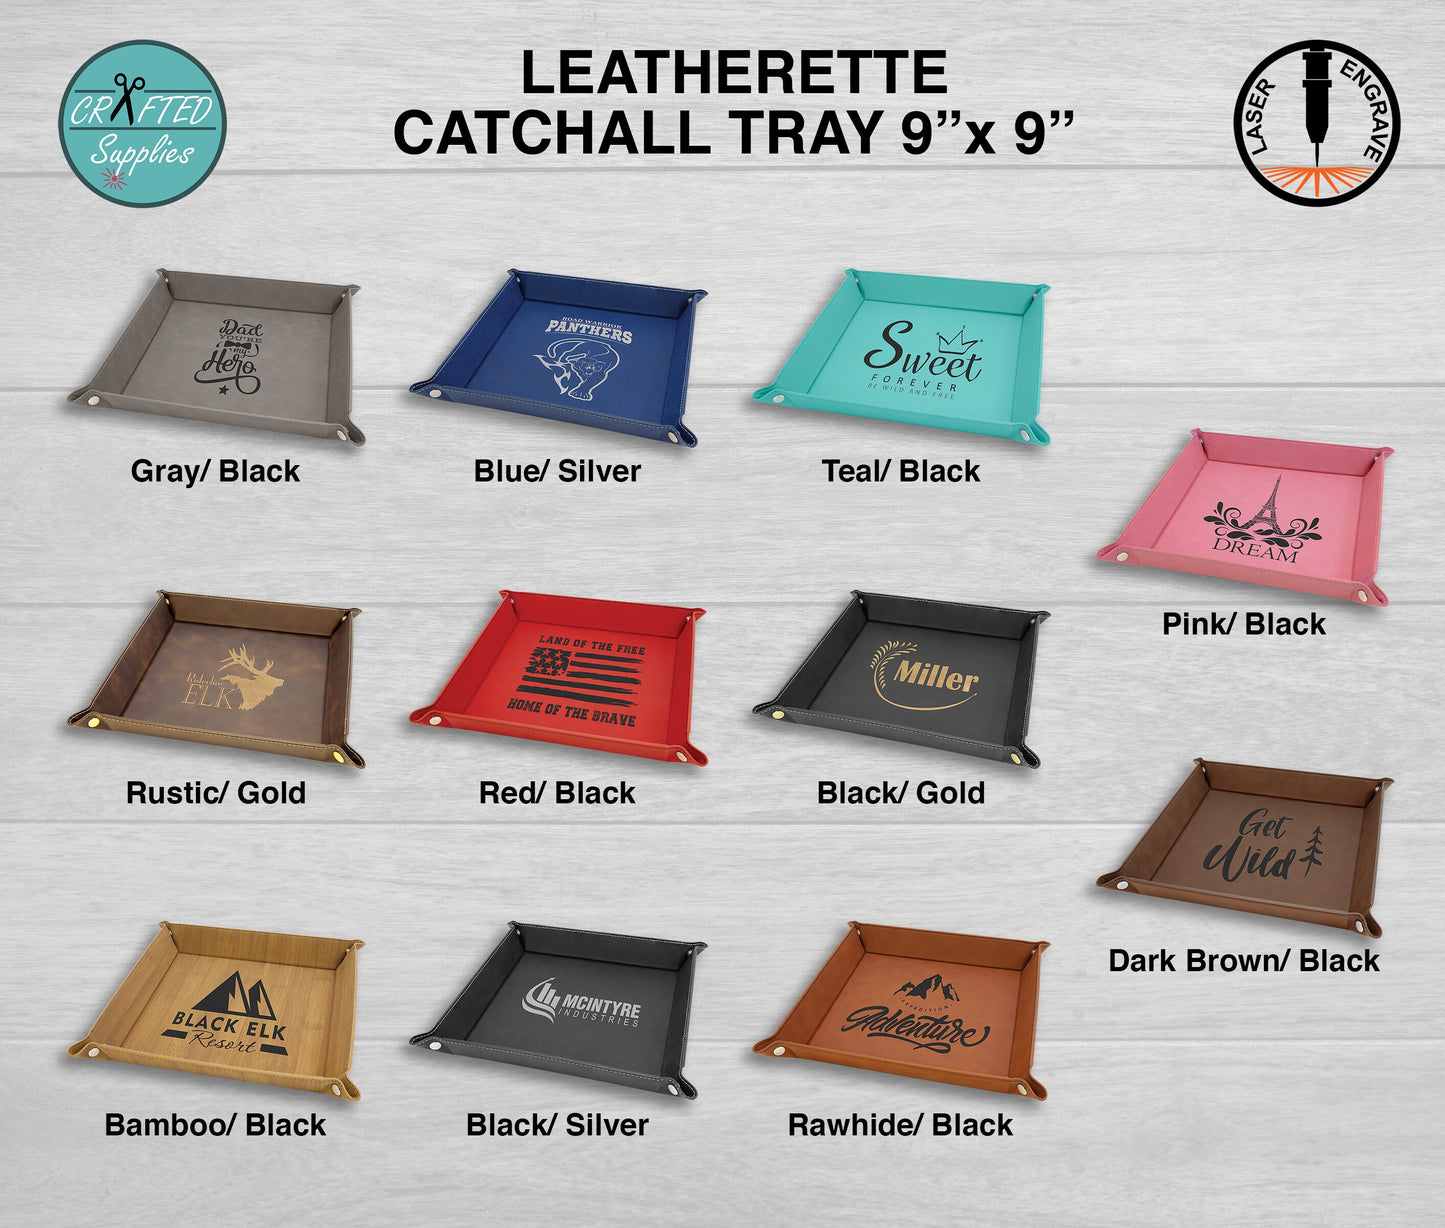 Leatherette Catchall tray, Valet Tray 9 in x 9 in